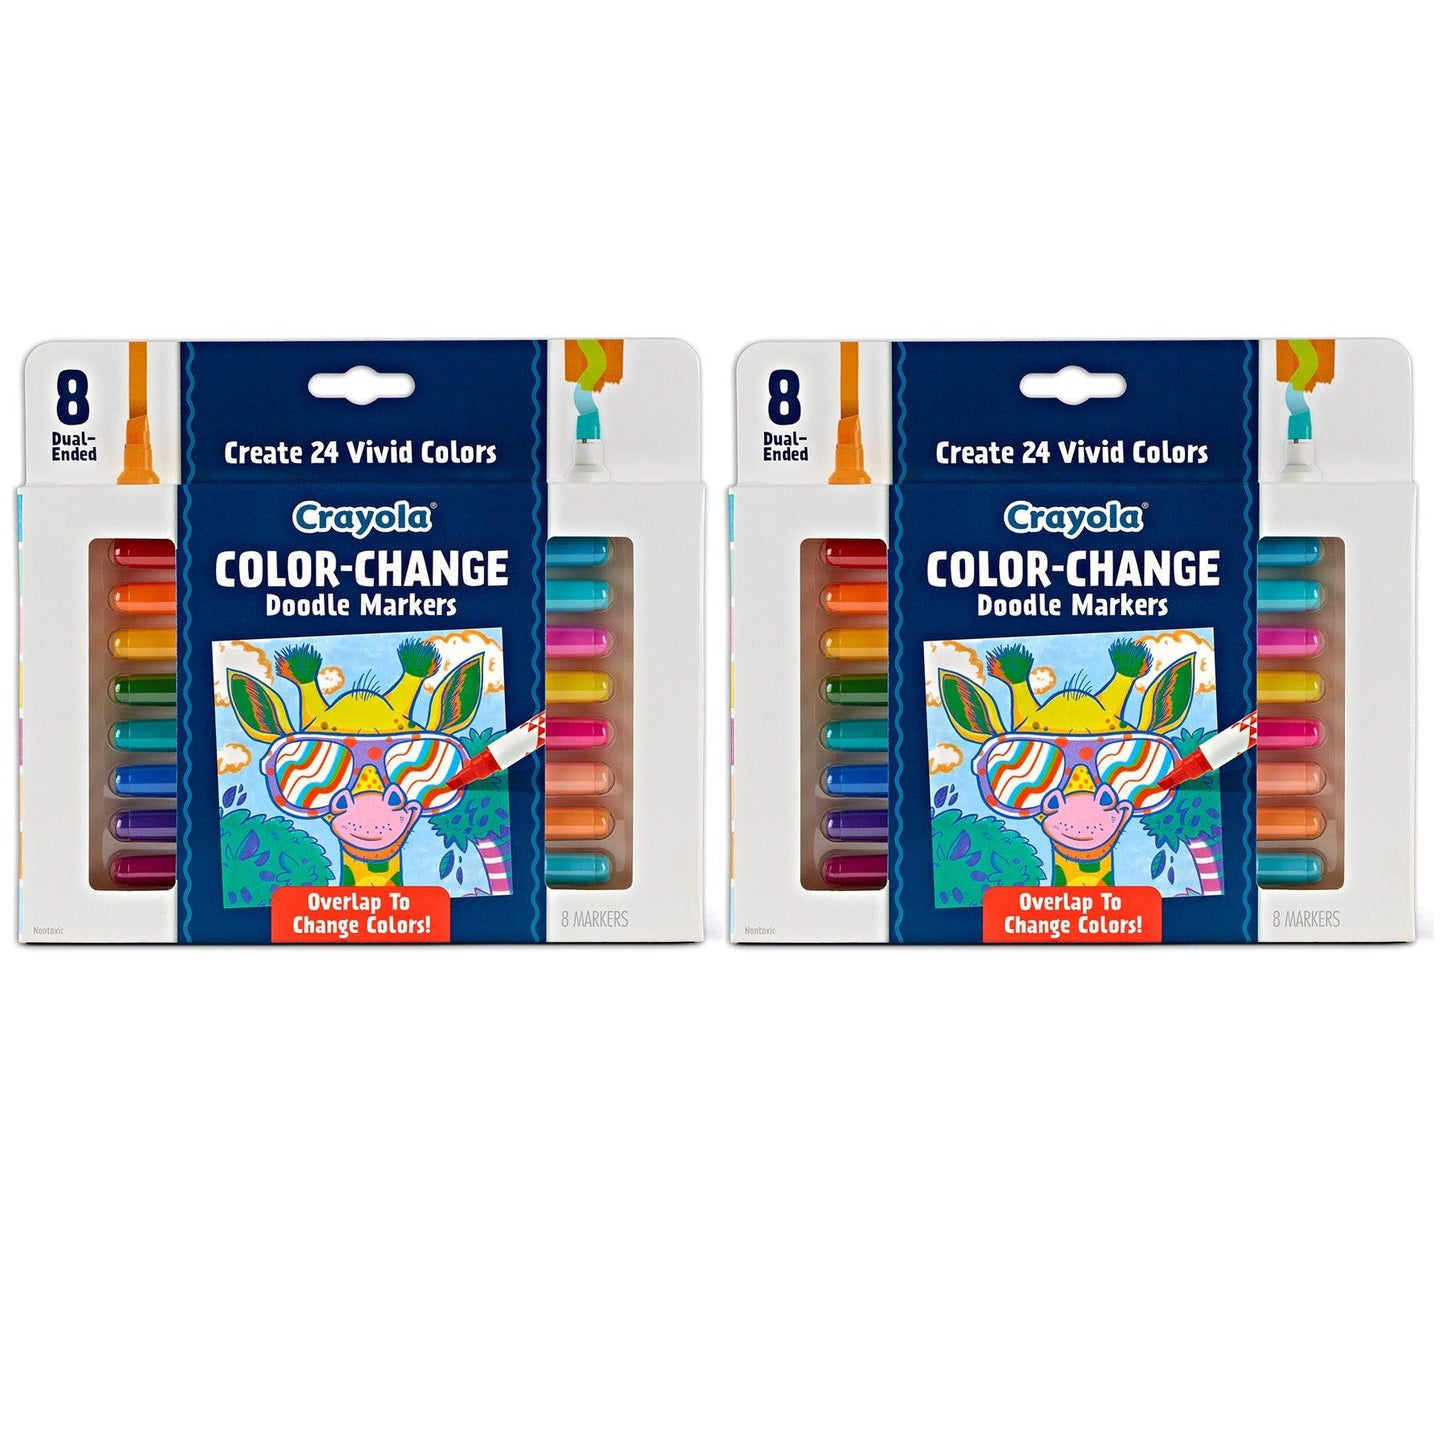 Doodle & Draw Color Change Doodle Marker, 8 Per Pack, 2 Packs - Loomini